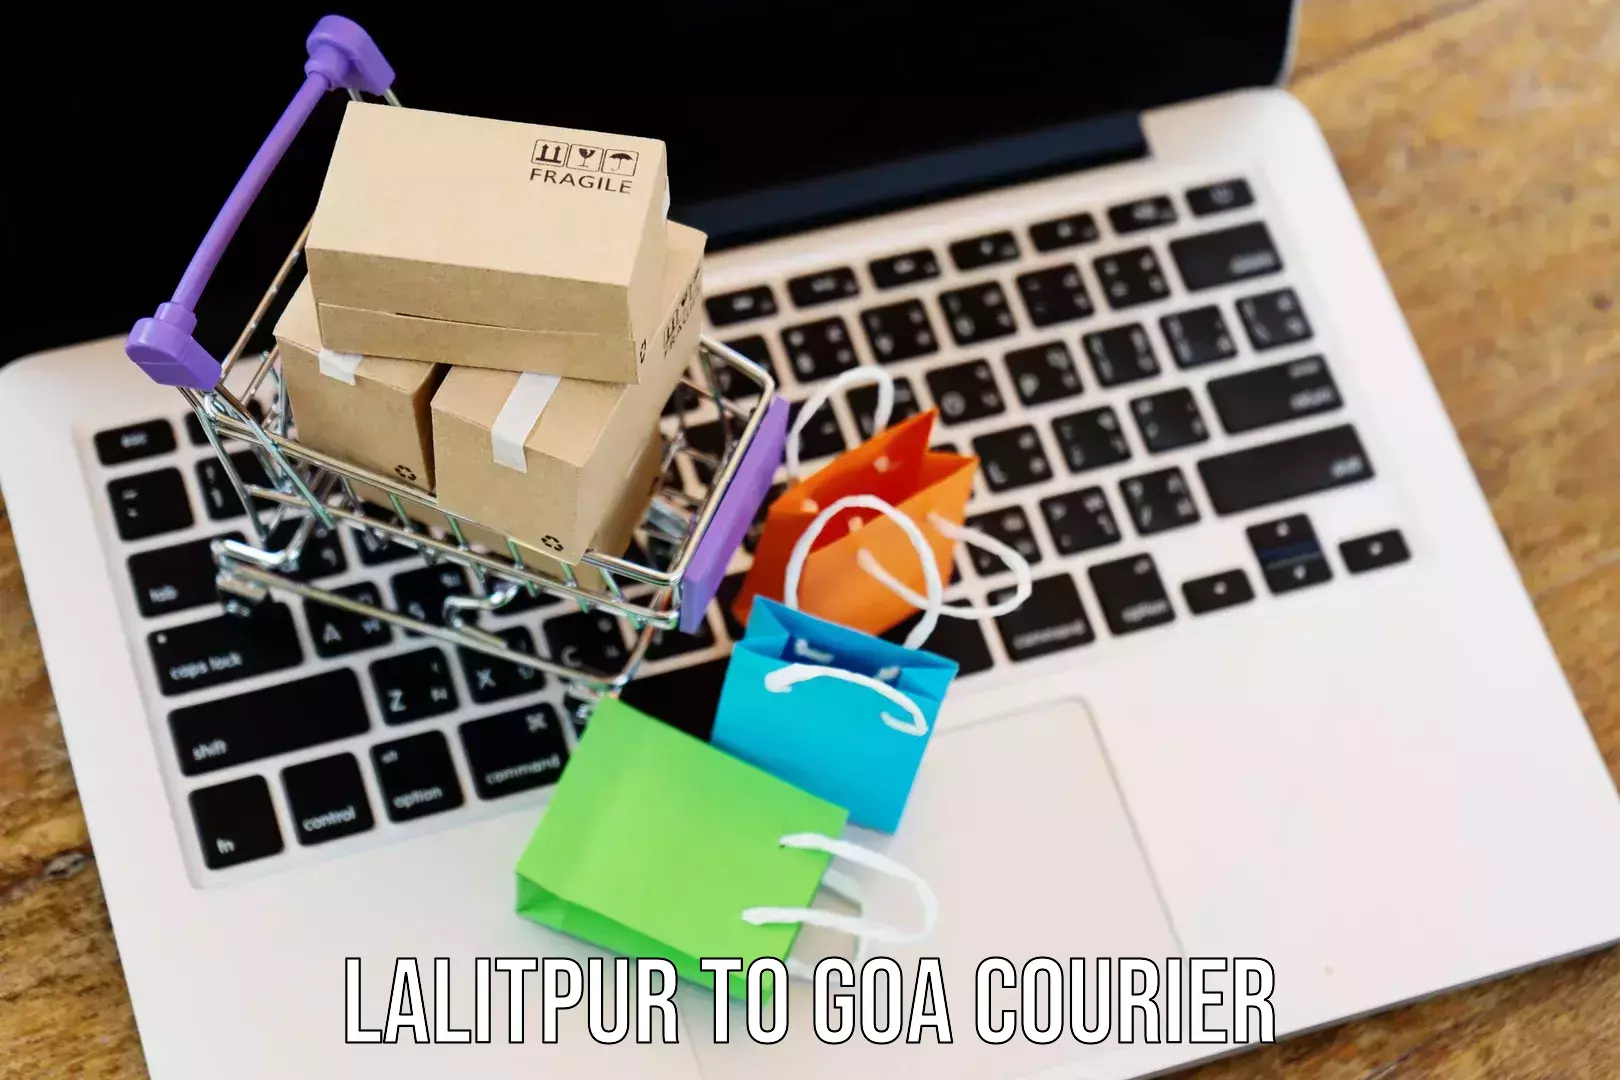 Custom courier packaging in Lalitpur to Bardez